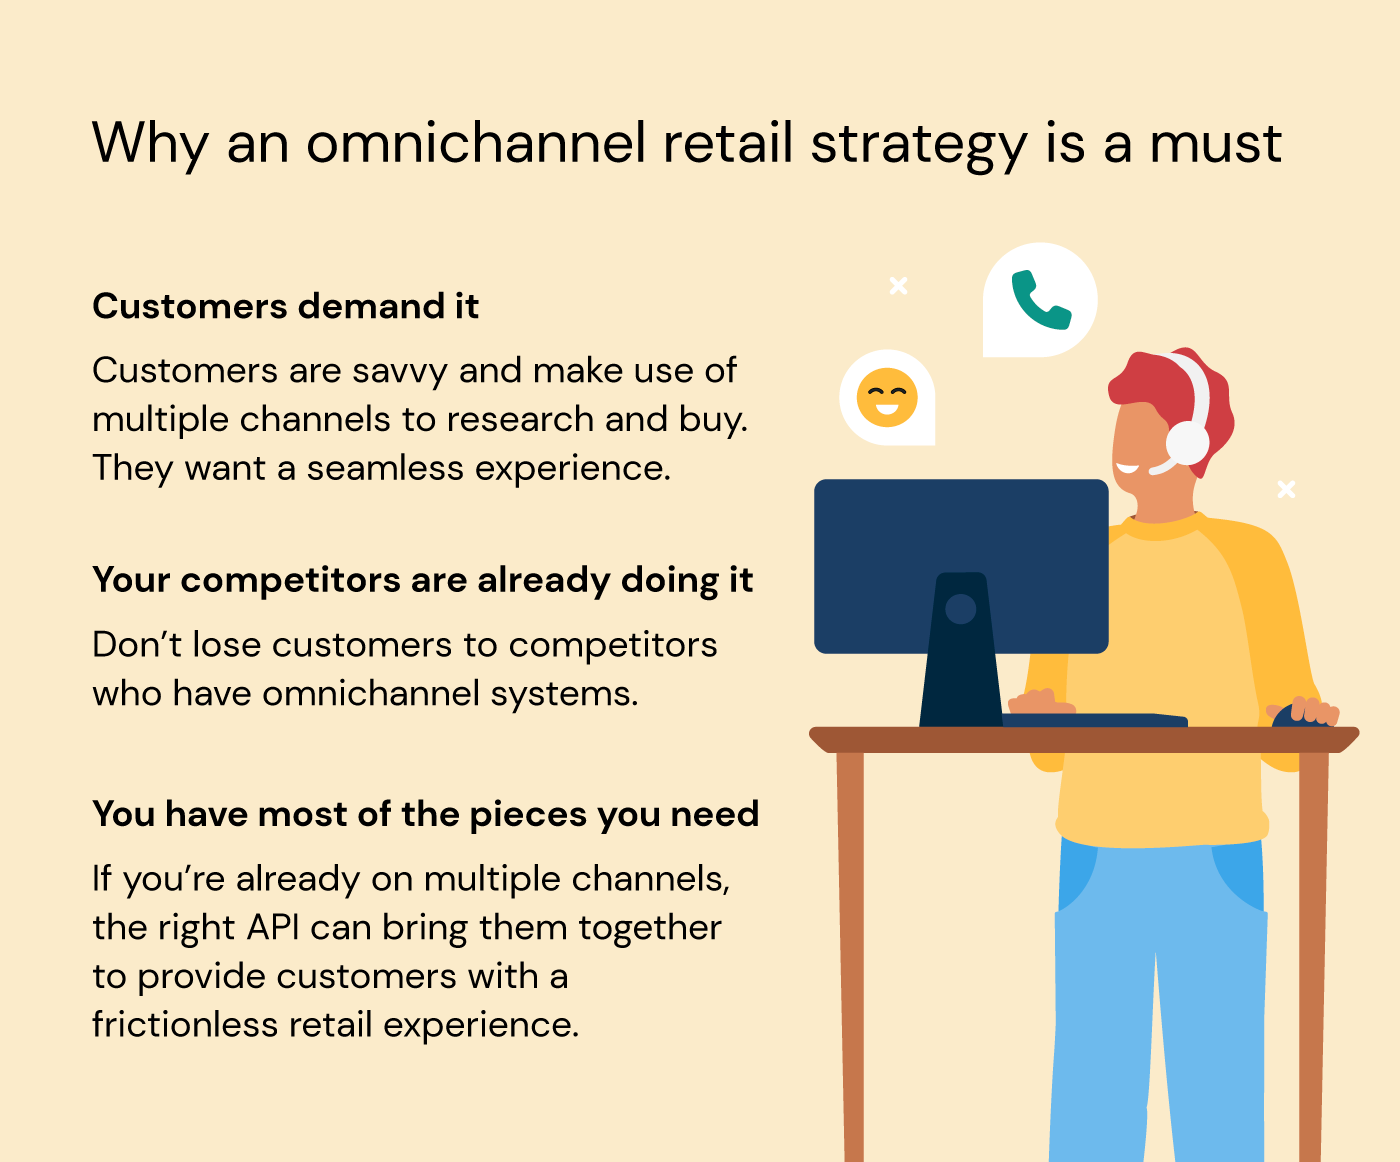 Illustration highlights the benefits of omnichannel retail strategies for businesses